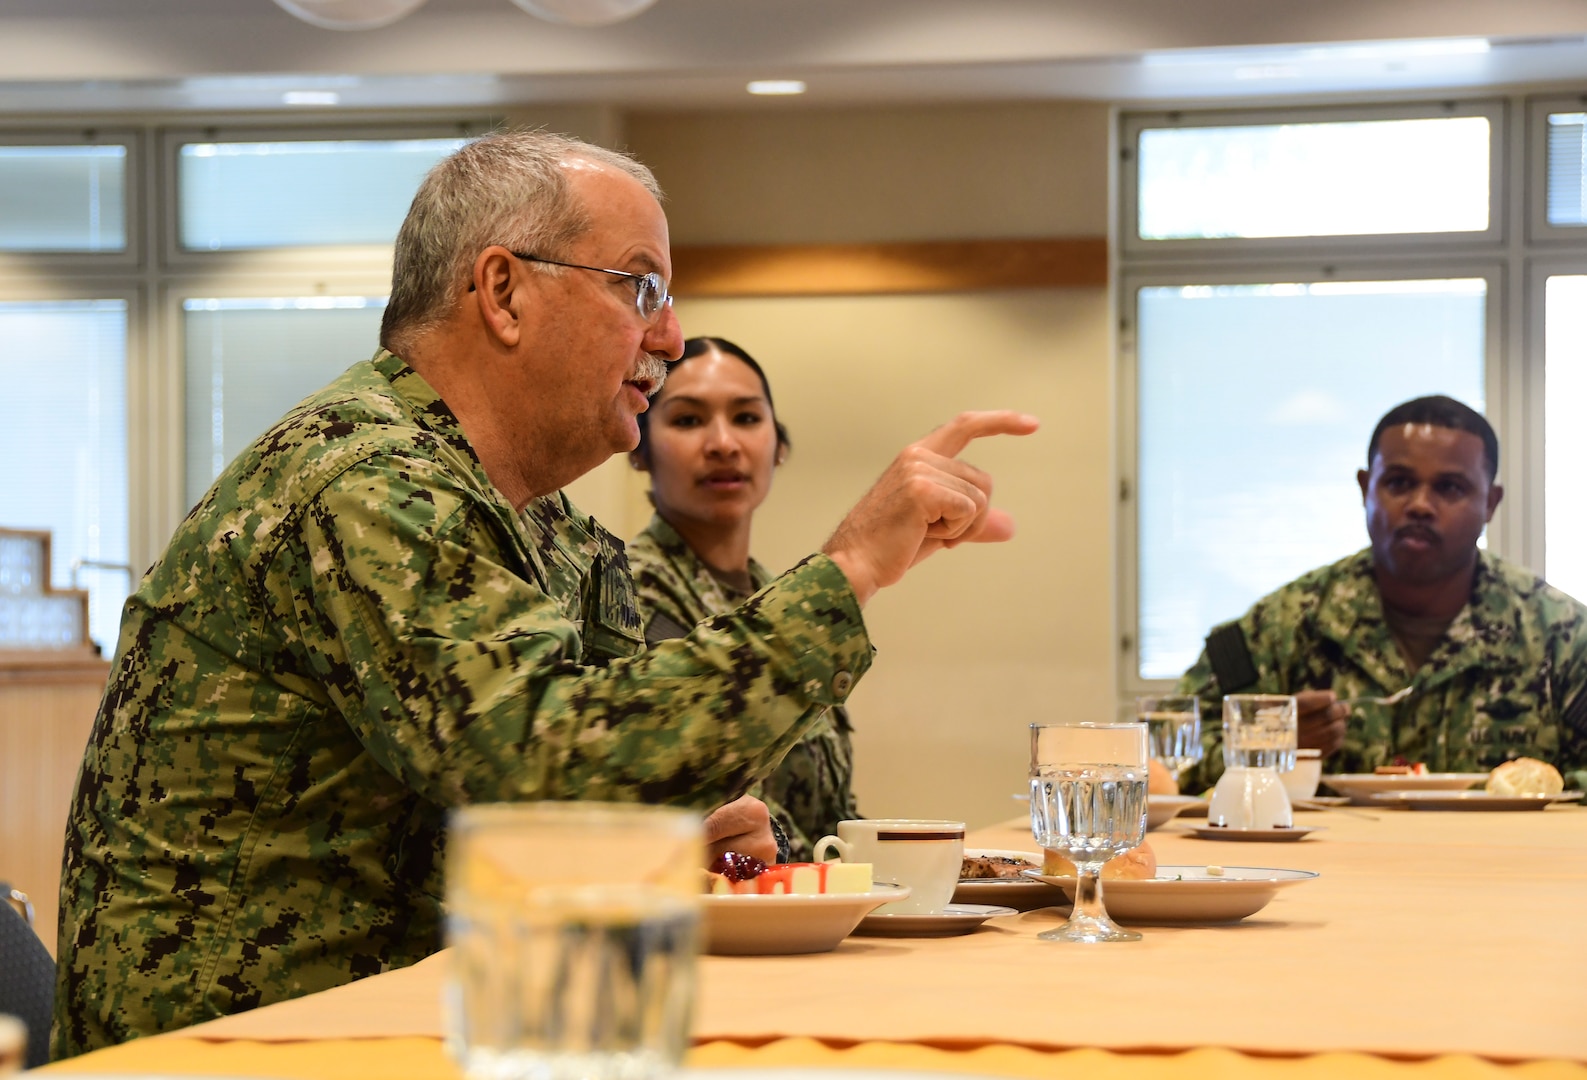 PORTSMOUTH, Va. (Oct. 21, 2020) – Surgeon General of the Navy Rear Adm. Bruce Gillingham speaks to Sailors during a lunch at Naval Medical Center Portsmouth (NMCP) Oct. 21.